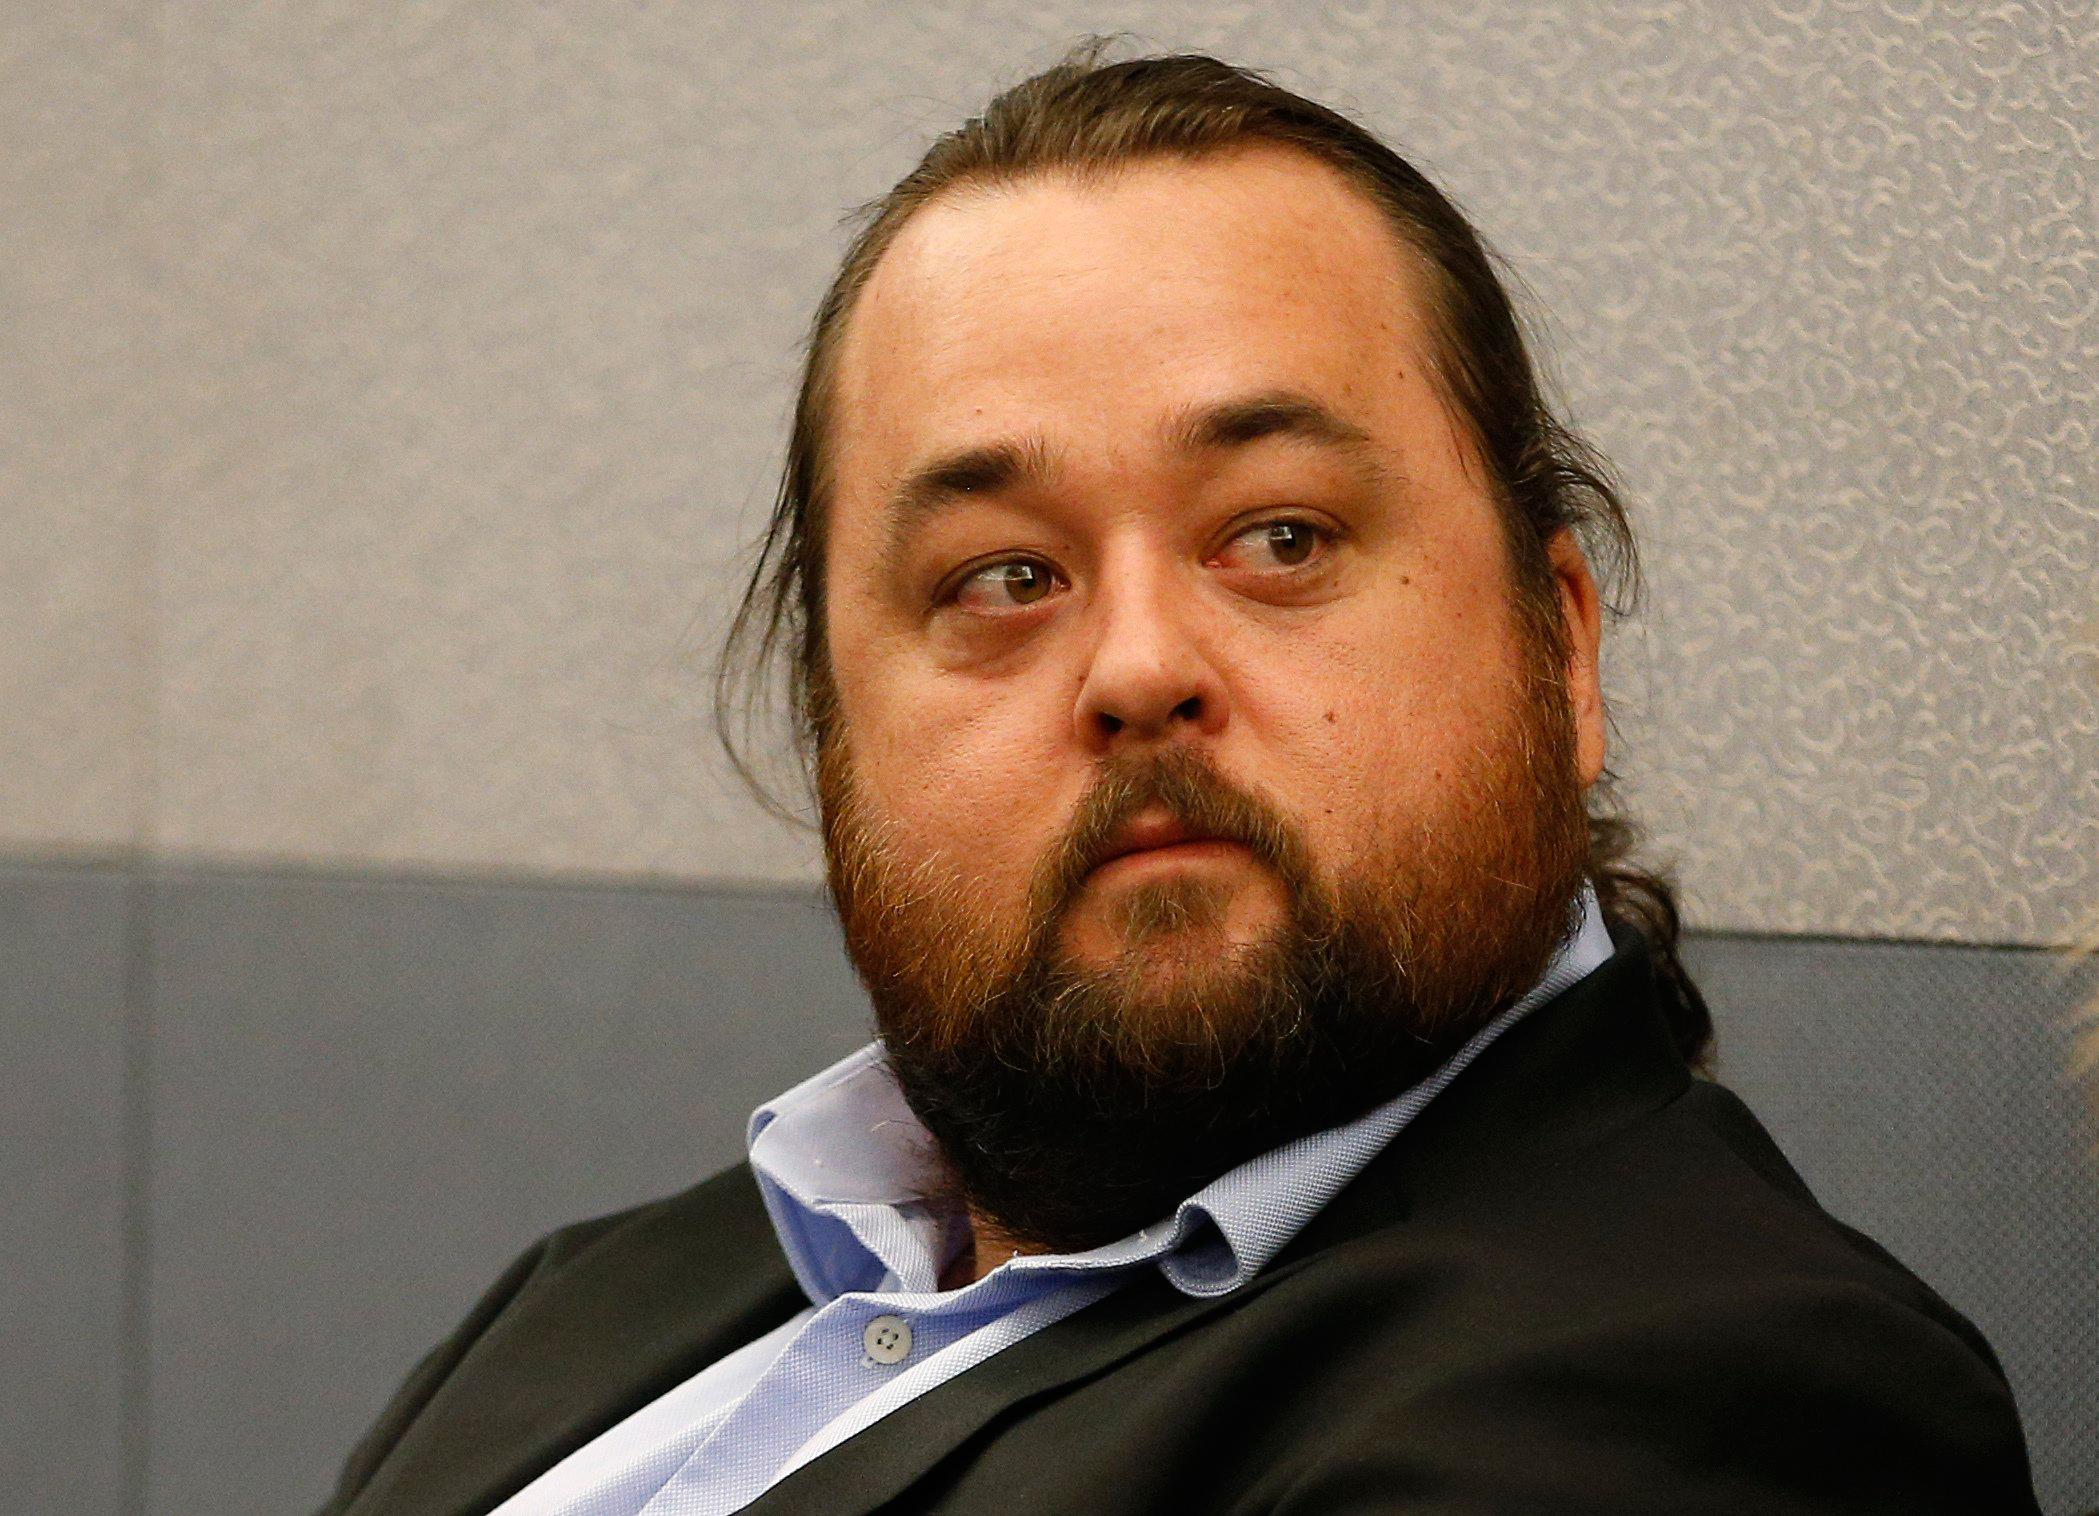 APTOPIX Pawn SAustin Lee Russell, better known as Chumlee from the TV series "Pawn Stars," appears in court Monday, May 23, 2016, in Las Vegas. Russell and his lawyers told a Las Vegas judge he intends to plead guilty in state court to felony weapon and misdemeanor attempted drug possession charges. (AP Photo/John Locher)tars Star Plea